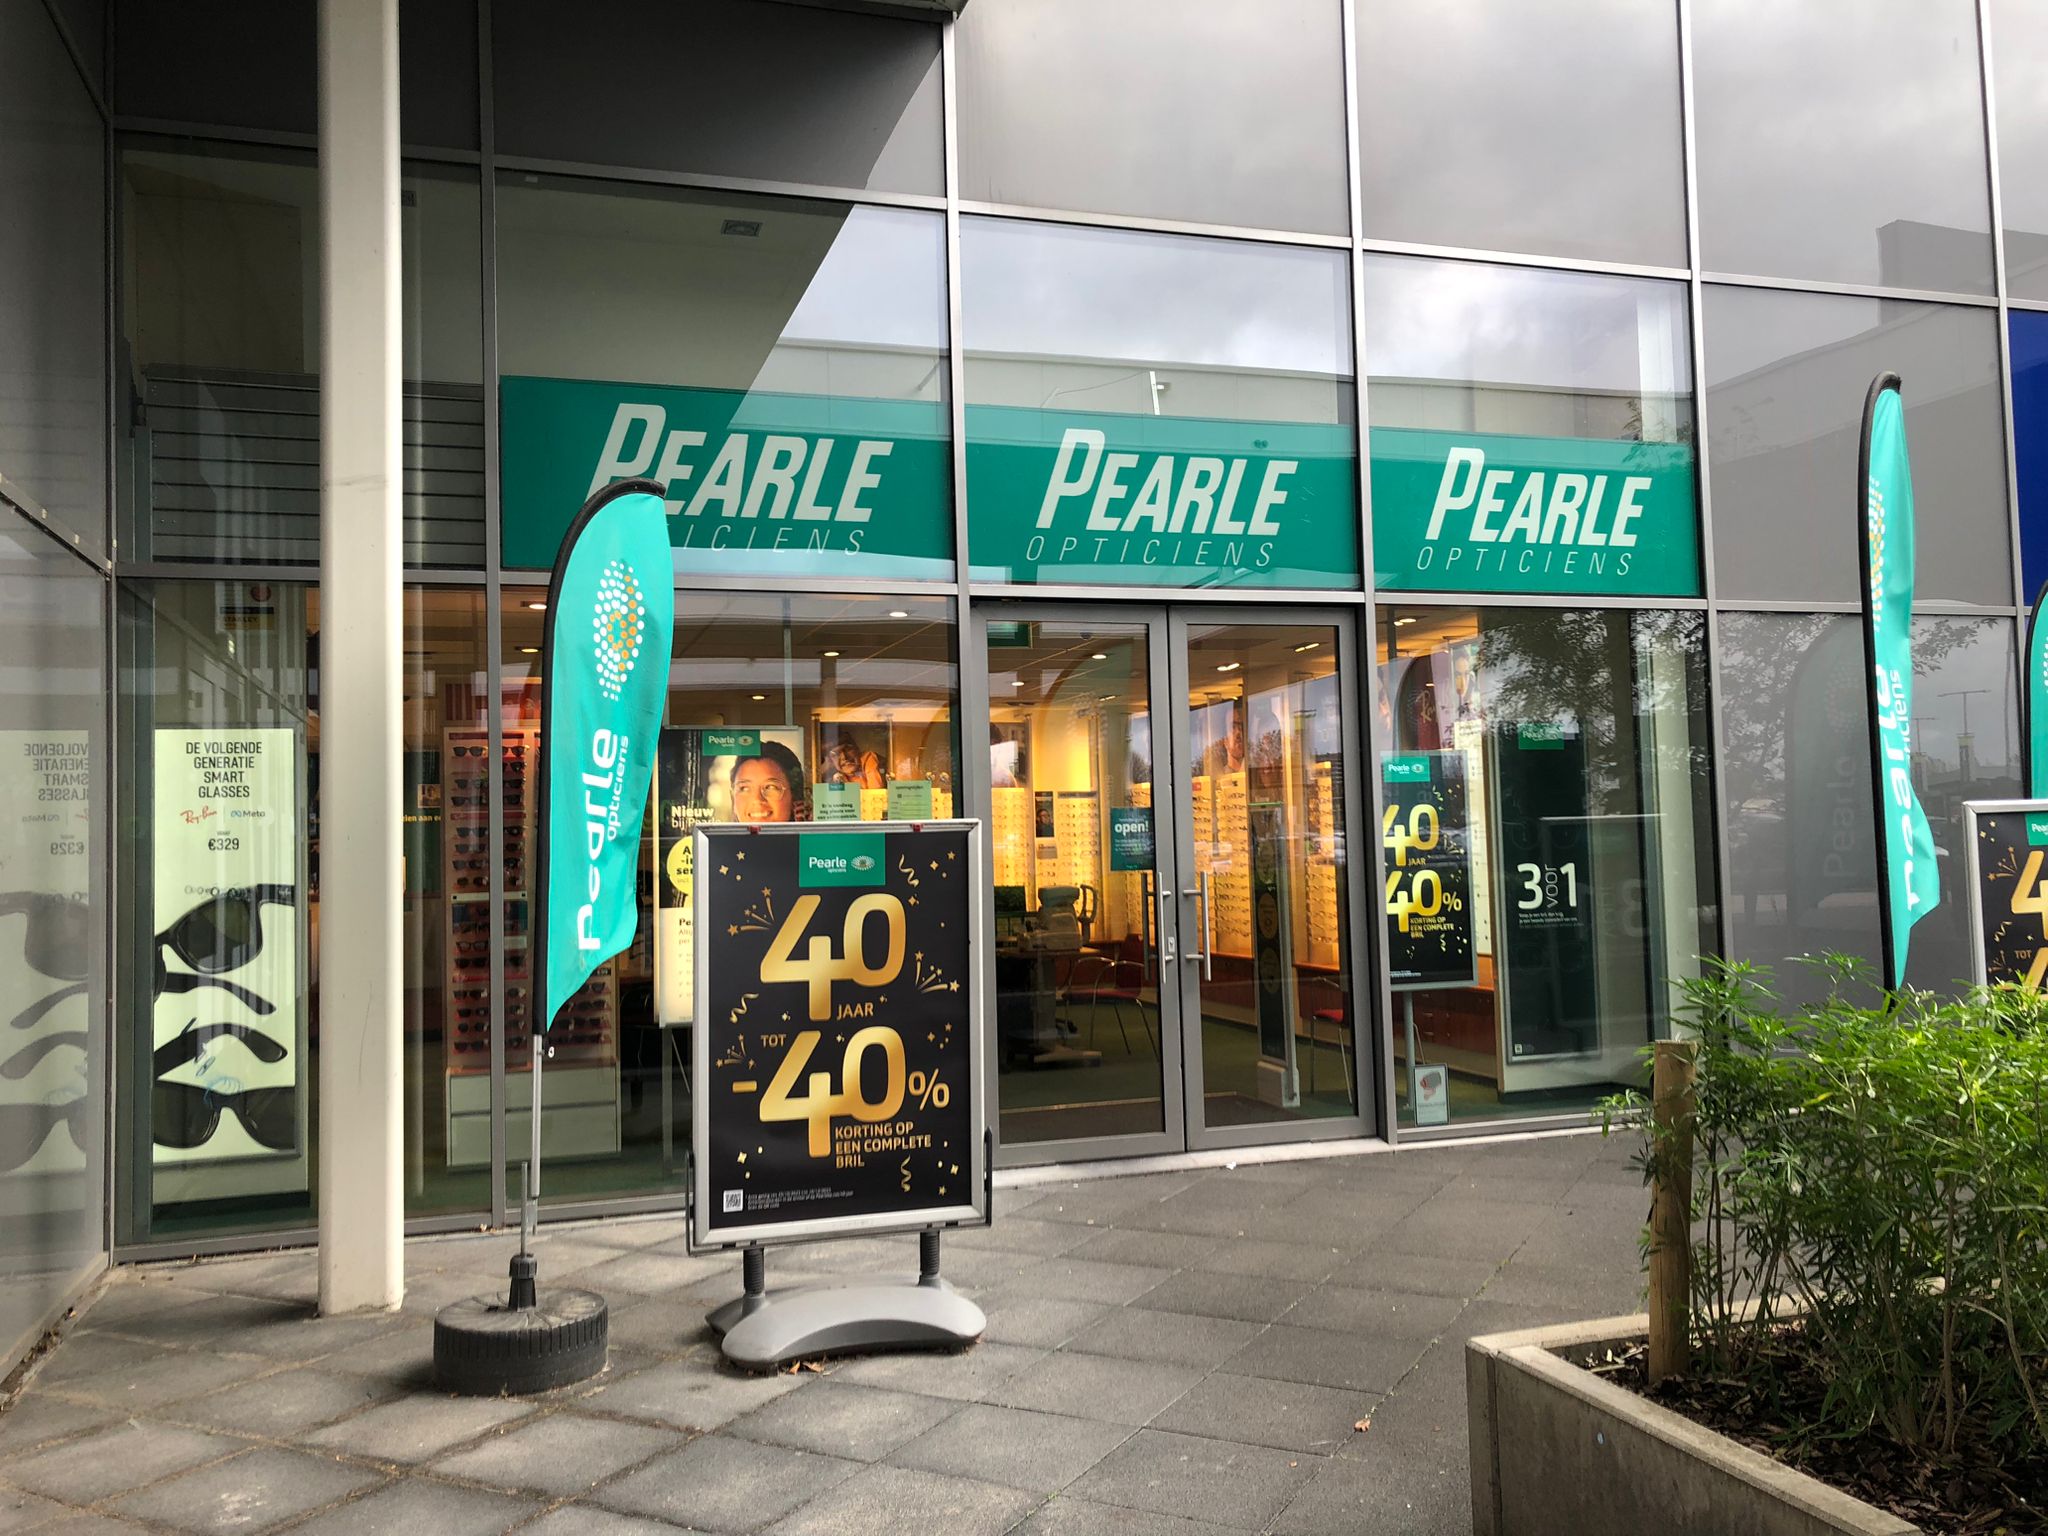 Pearle Opticiens Sint Pieters Leeuw - Shopping Pajot